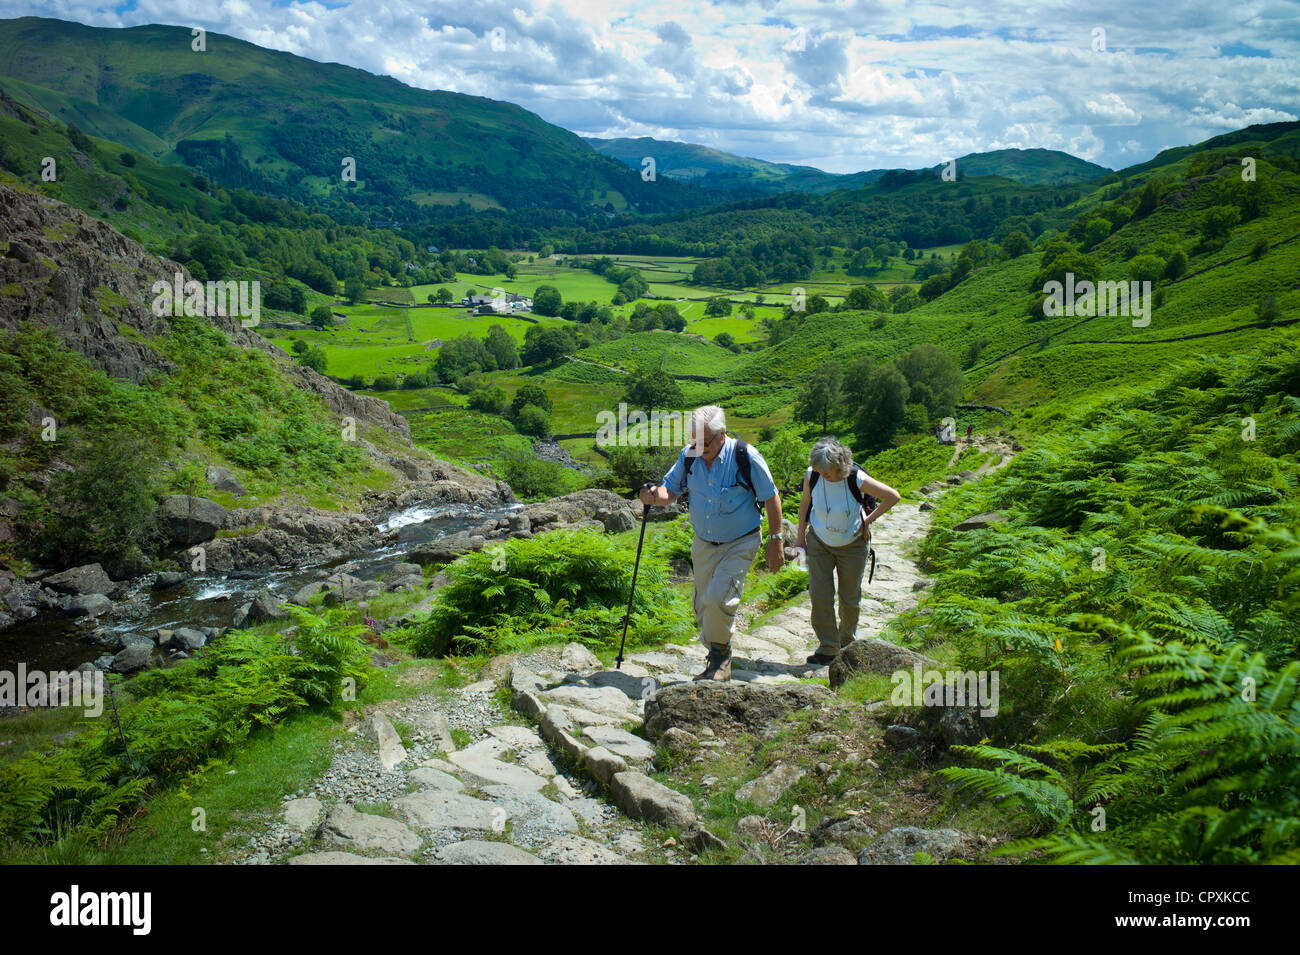 Tourists hill climbing on nature trail in lakeland countryside at Easedale in the Lake District National Park, Cumbria, UK Stock Photo